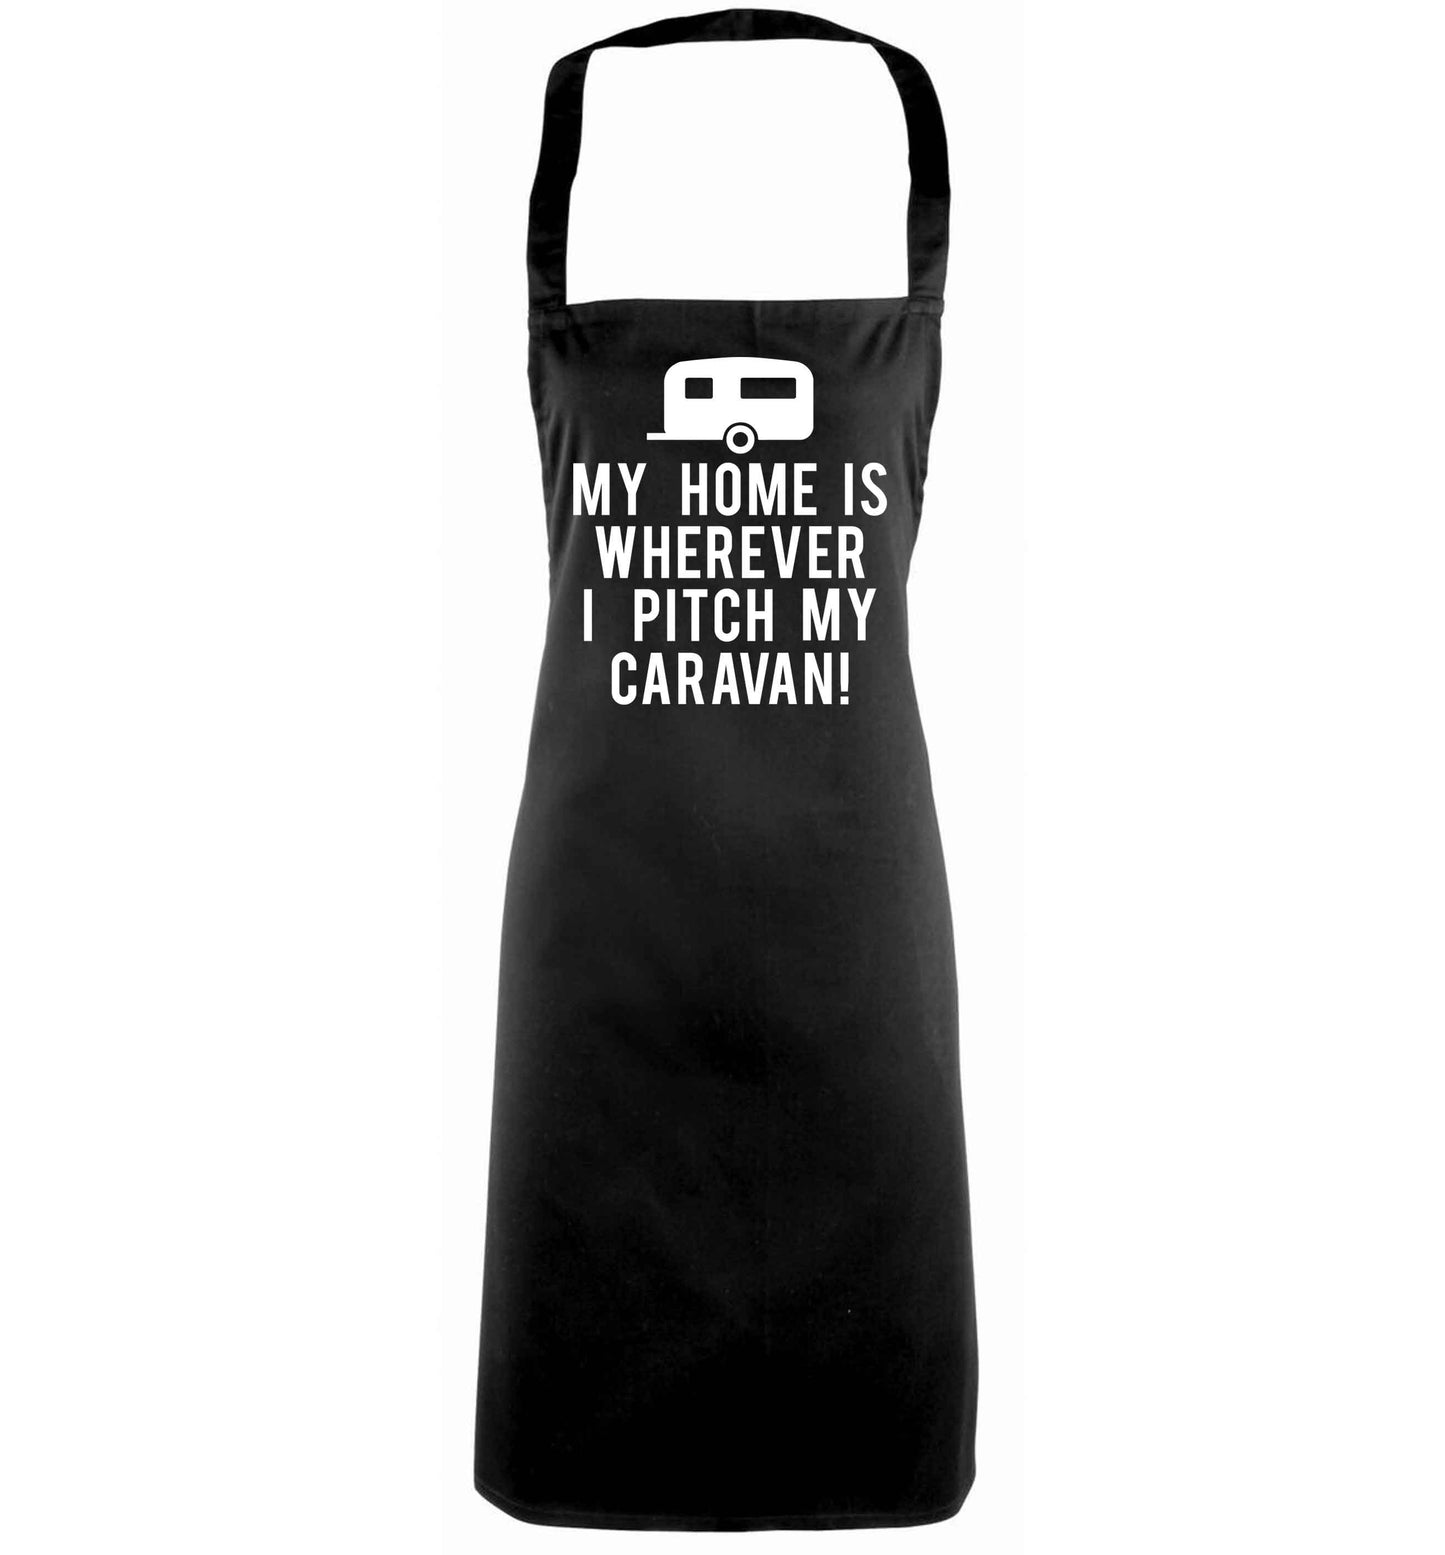 My home is wherever I pitch my caravan black apron